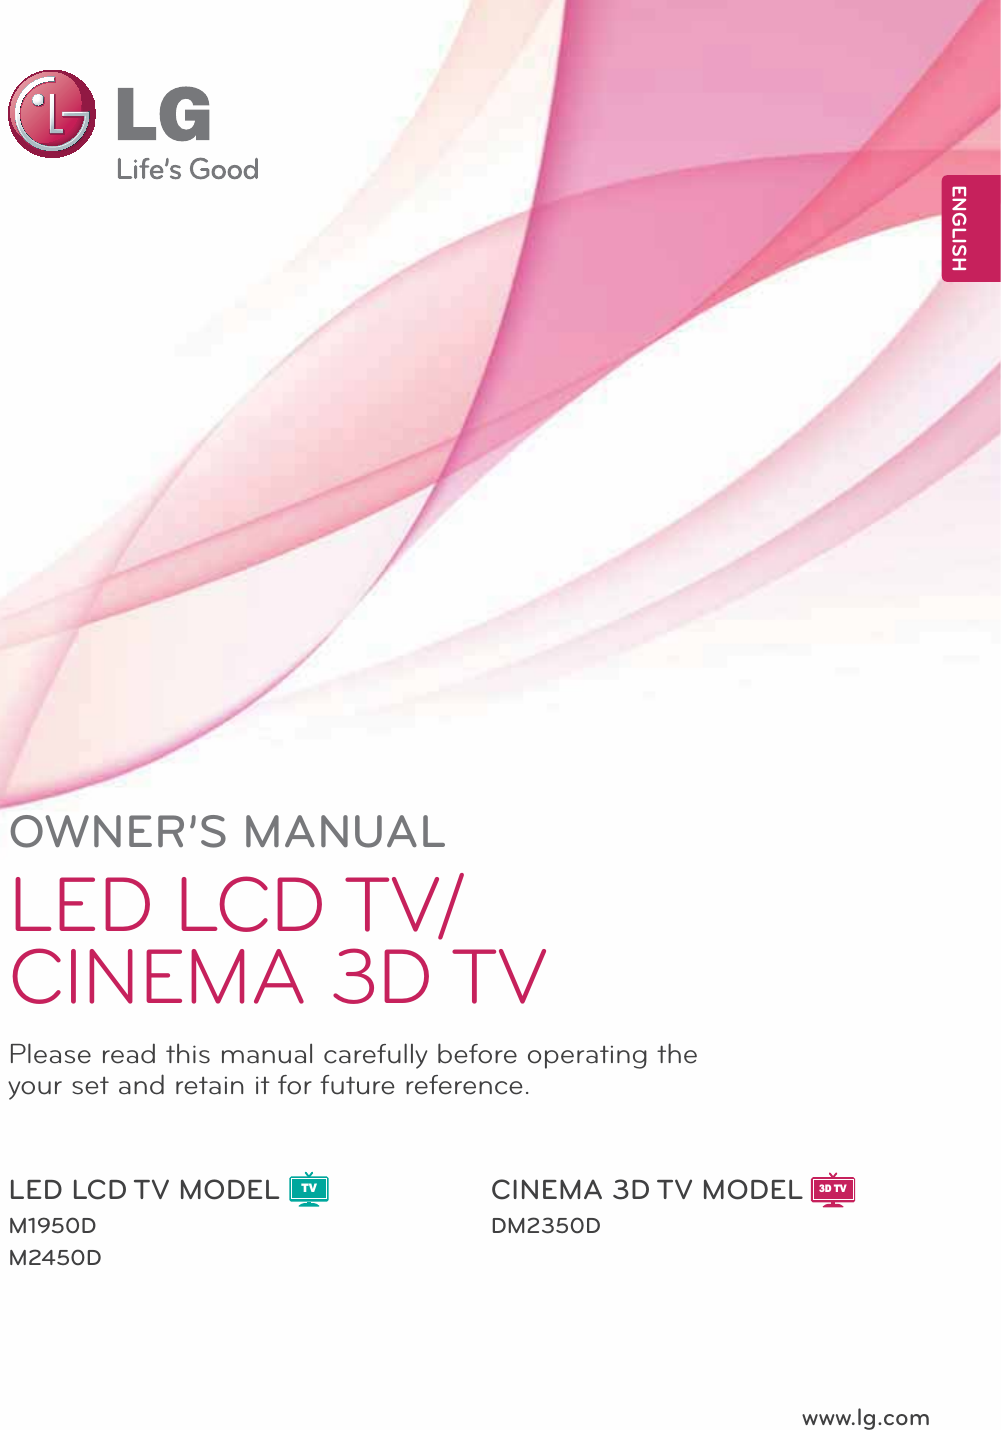 www.lg.comOWNER’S MANUALLED LCD TV/CINEMA 3D TVDM2350DM1950DM2450DPlease read this manual carefully before operating the your set and retain it for future reference.LED LCD TV MODEL CINEMA 3D TV MODELENGLISHTV3D TV